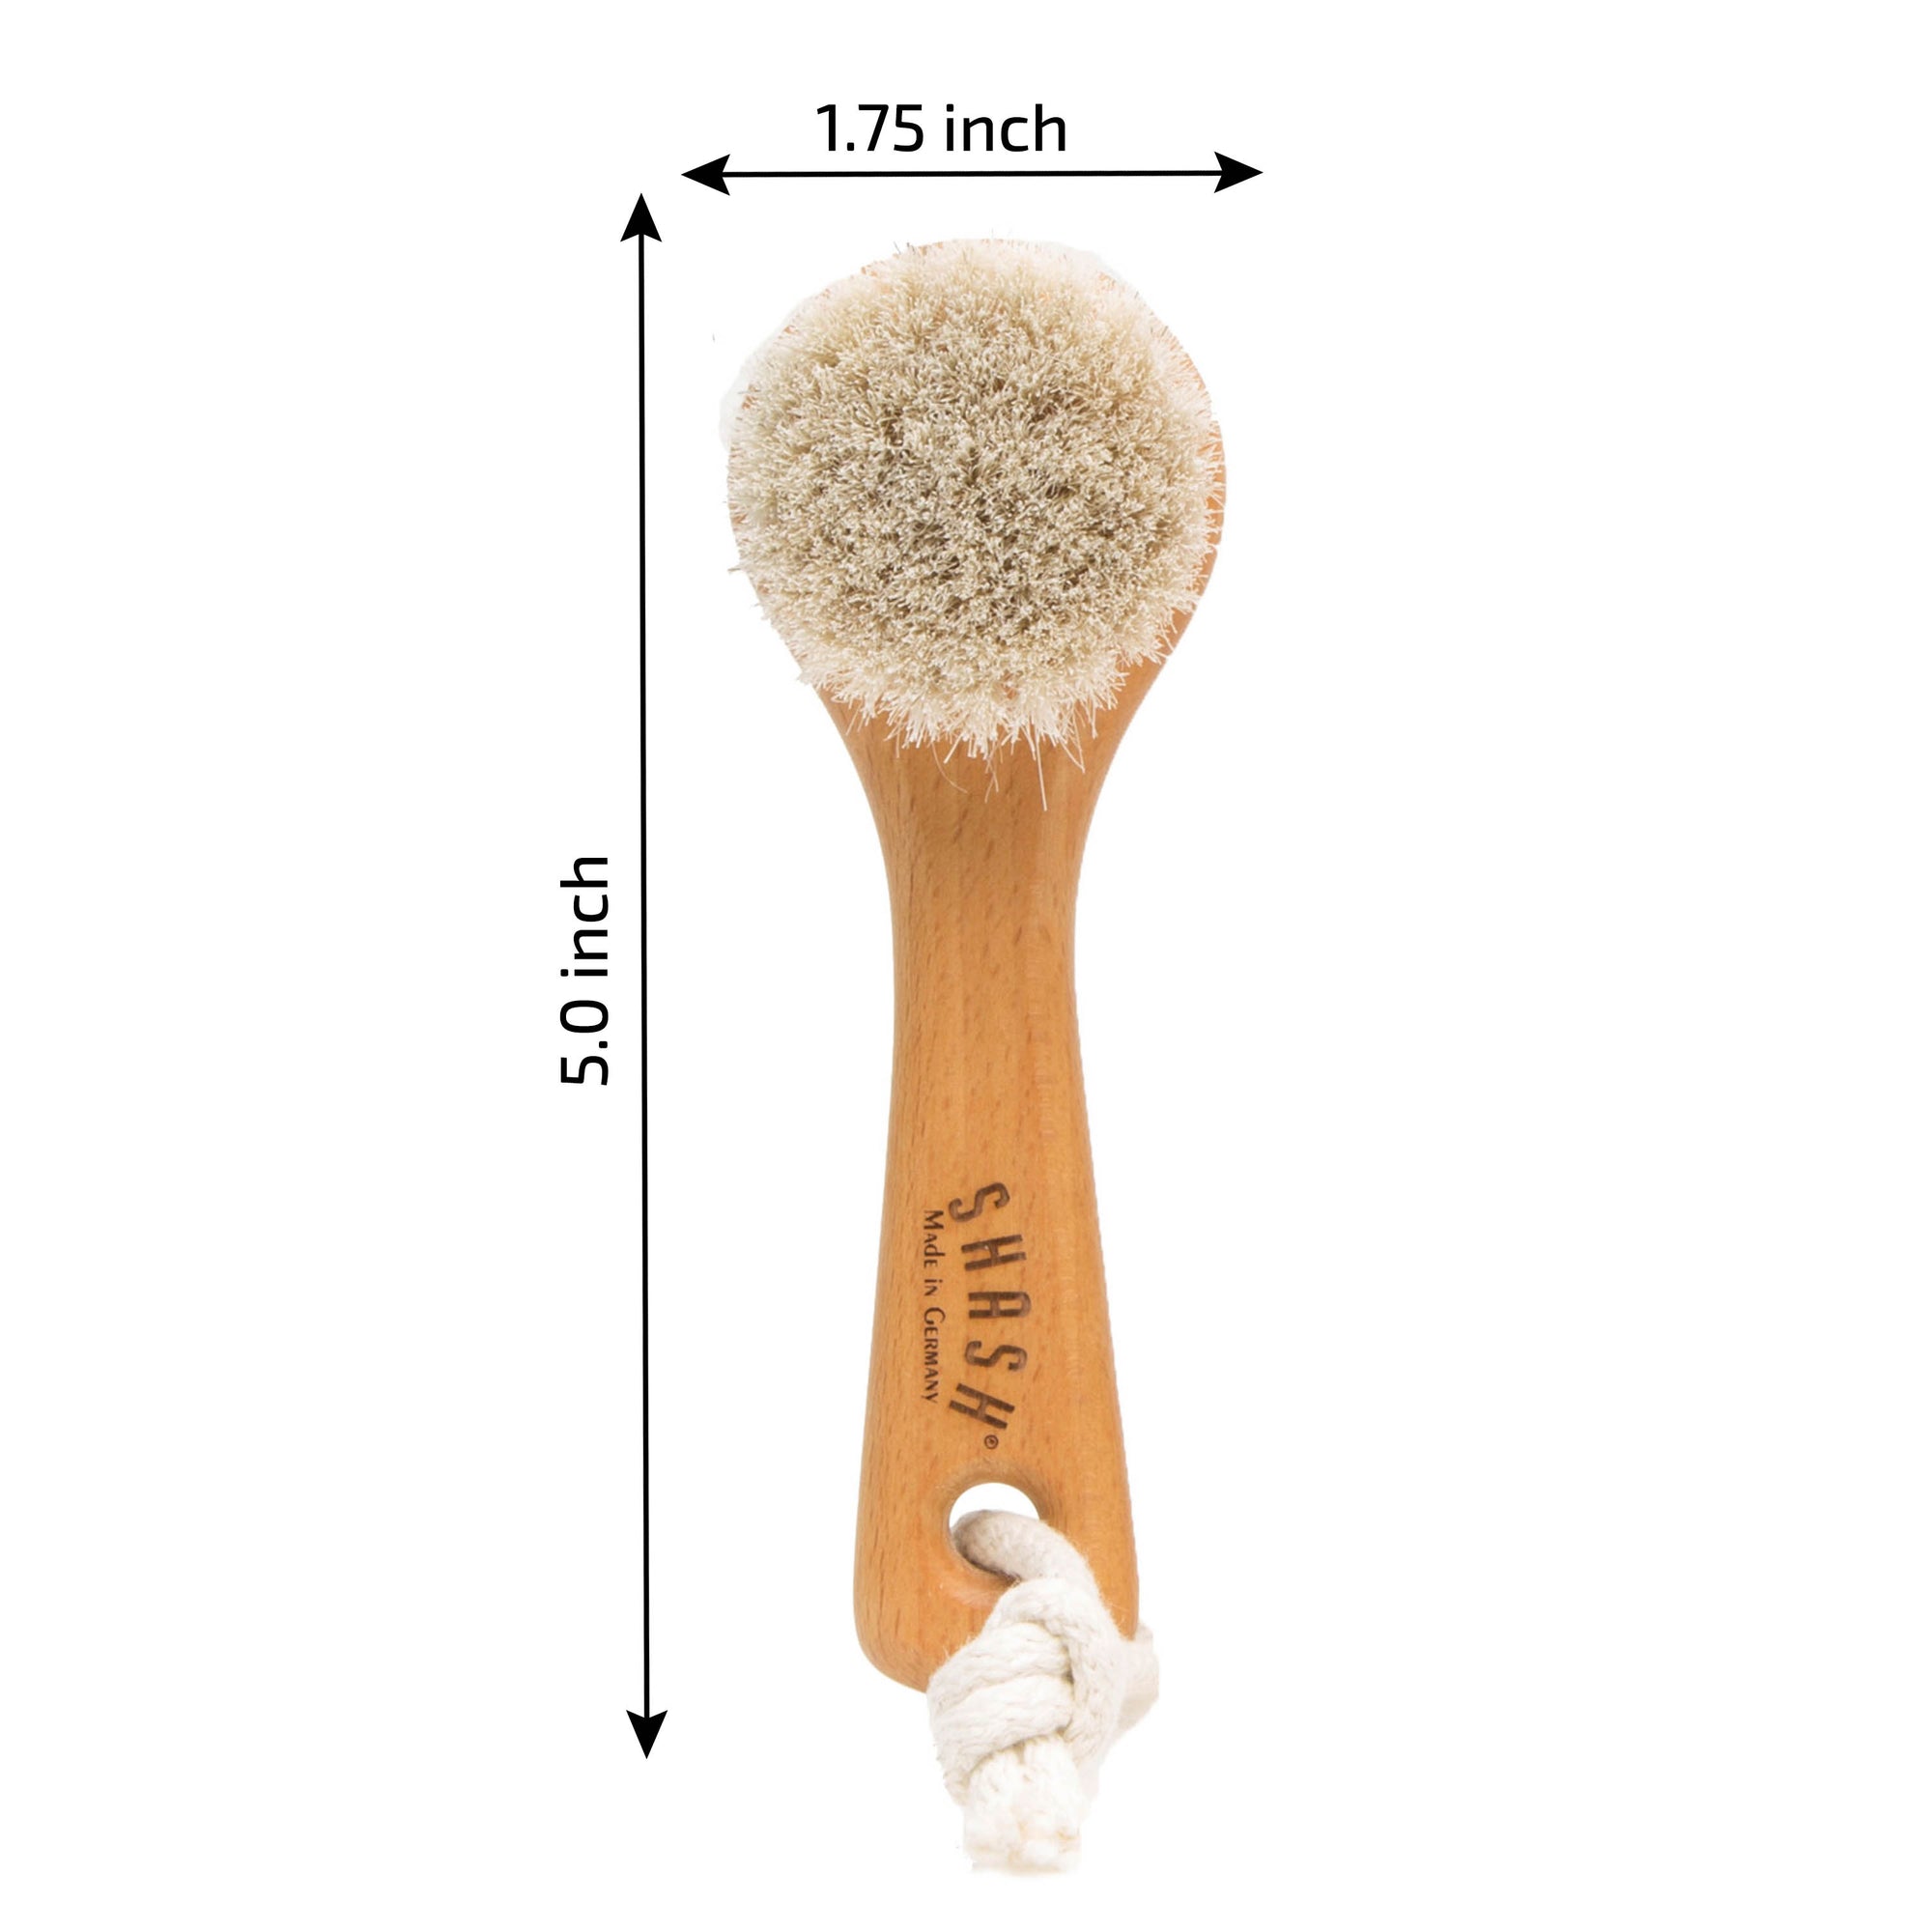 Made in Germany - Shash Exfoliating Face Brush, Soft Goat Bristle Face Brush, Gently Exfoliates Skin to Reduce Flaking and Fine Lines, Promotes